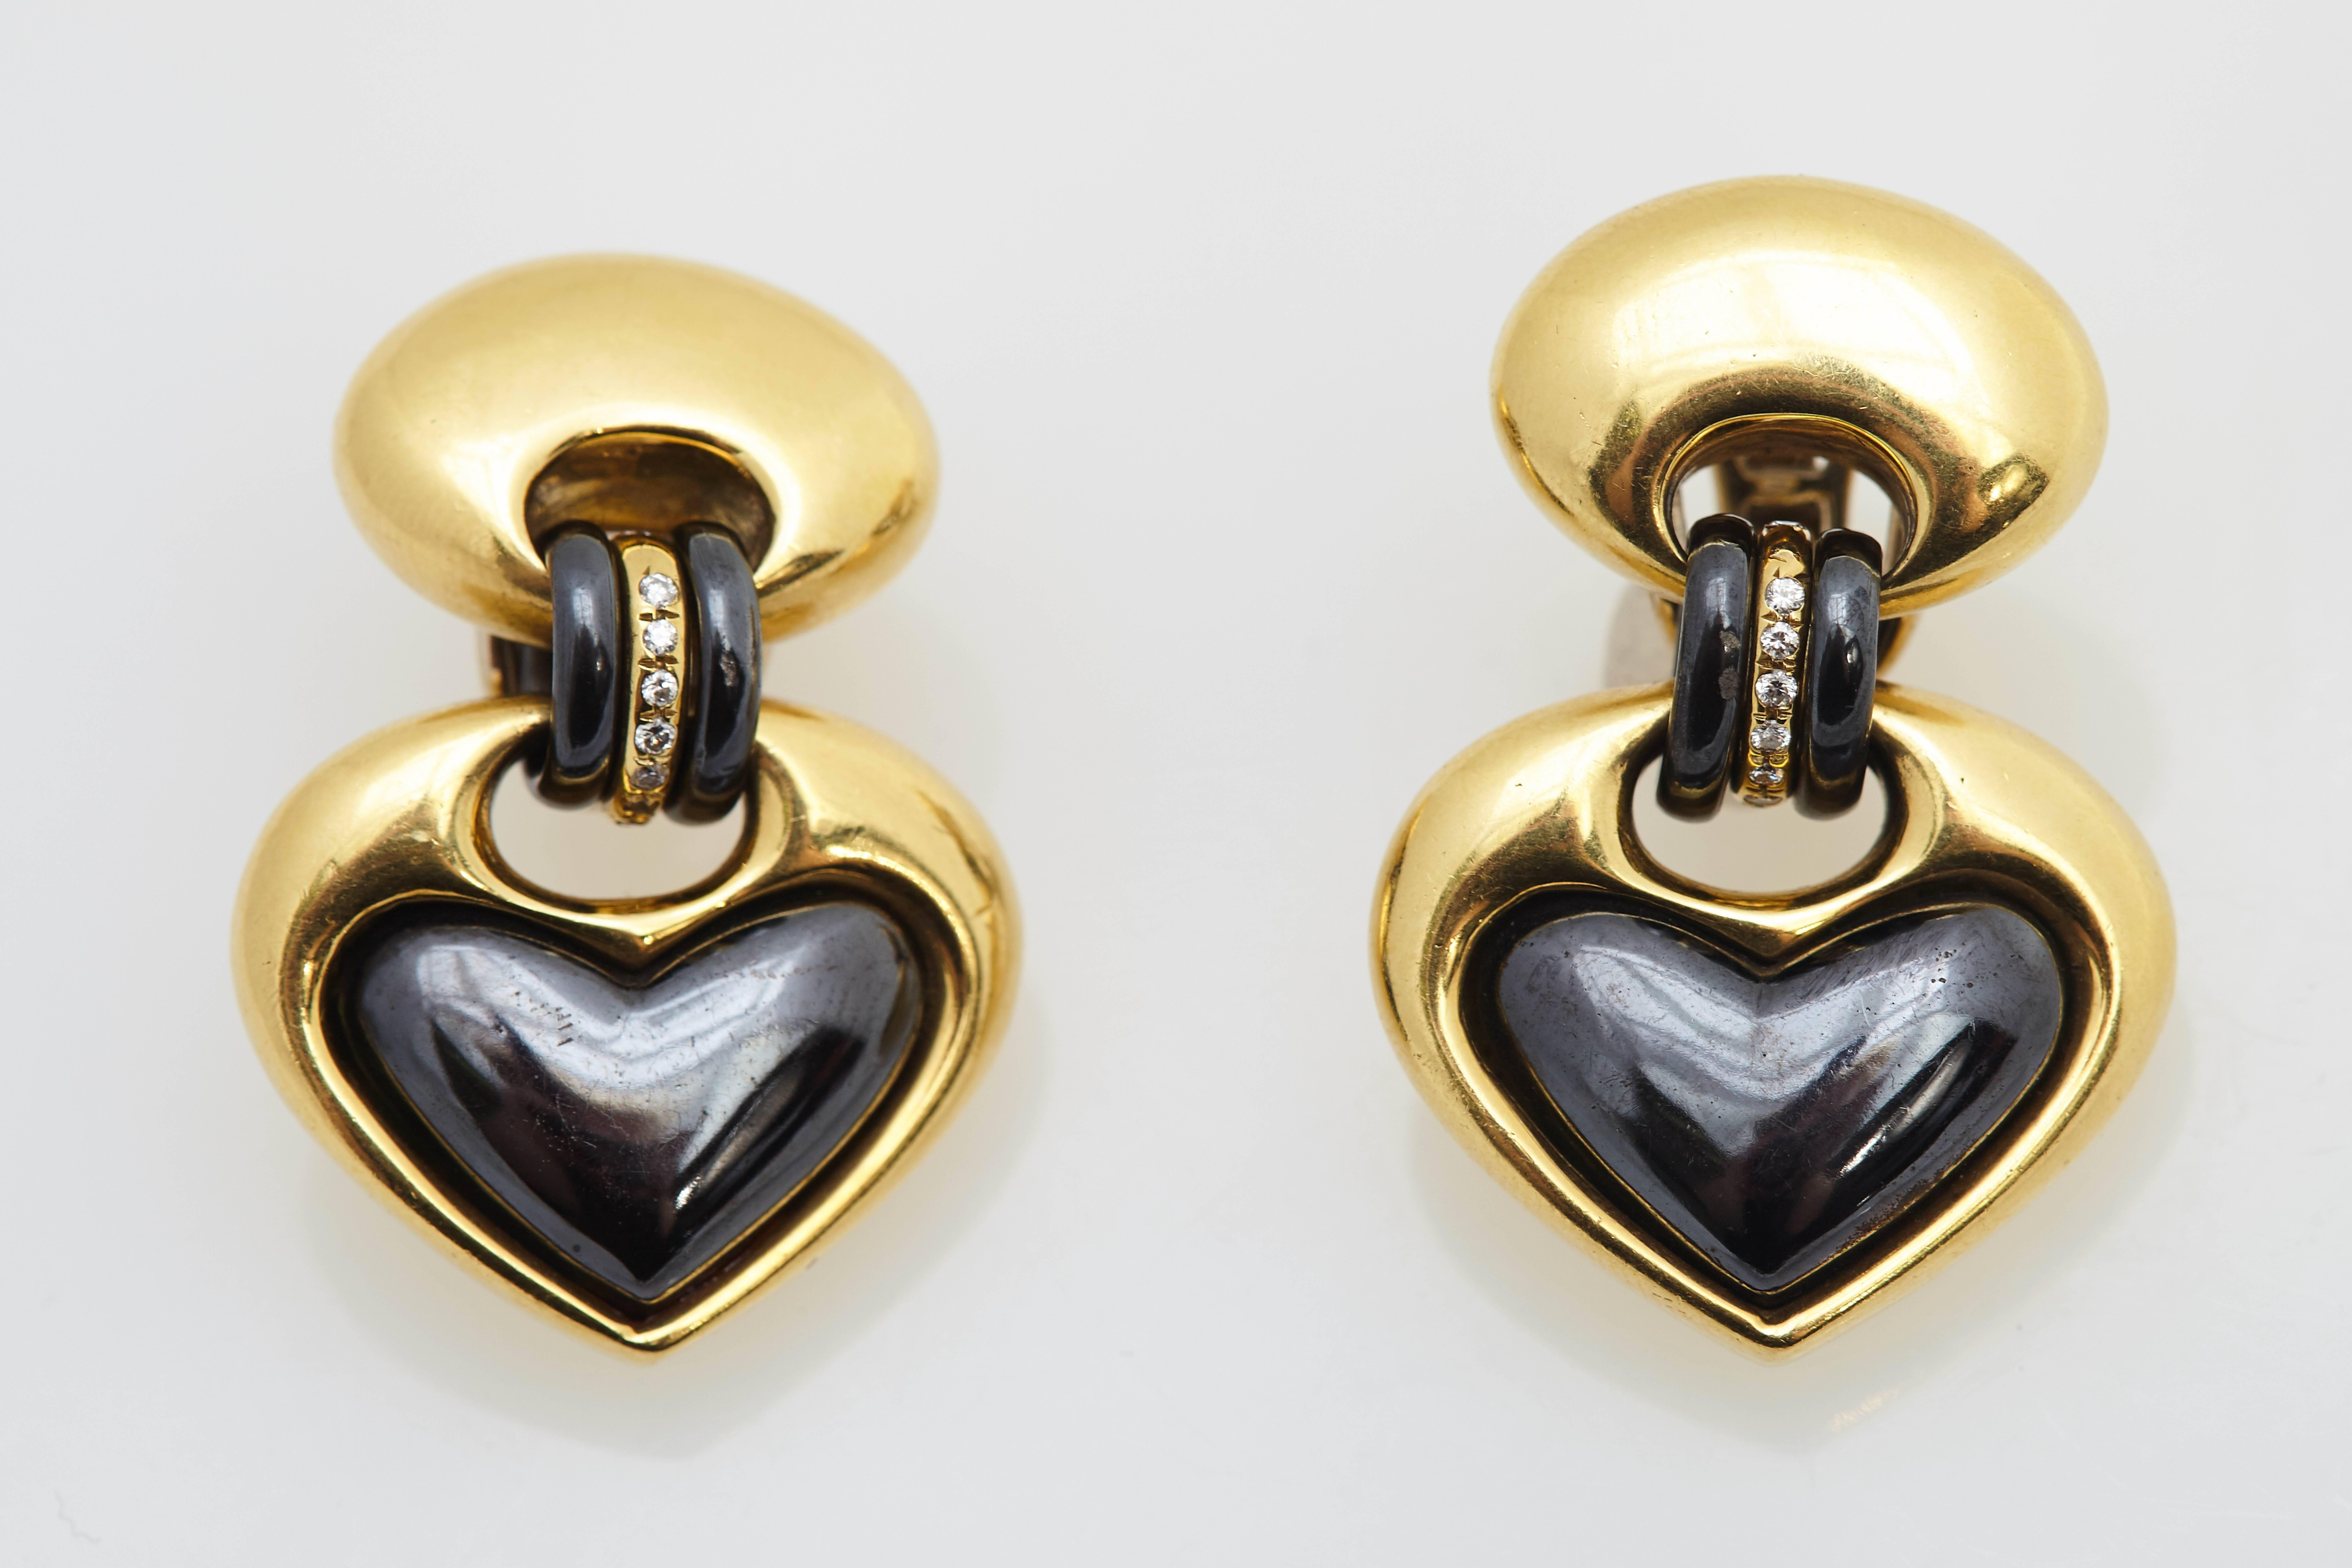 A chic heart-shaped 18K Yellow Gold and Hematite Ear-clips with Diamond Accents by Faraone. Made in Italy, circa 1970.